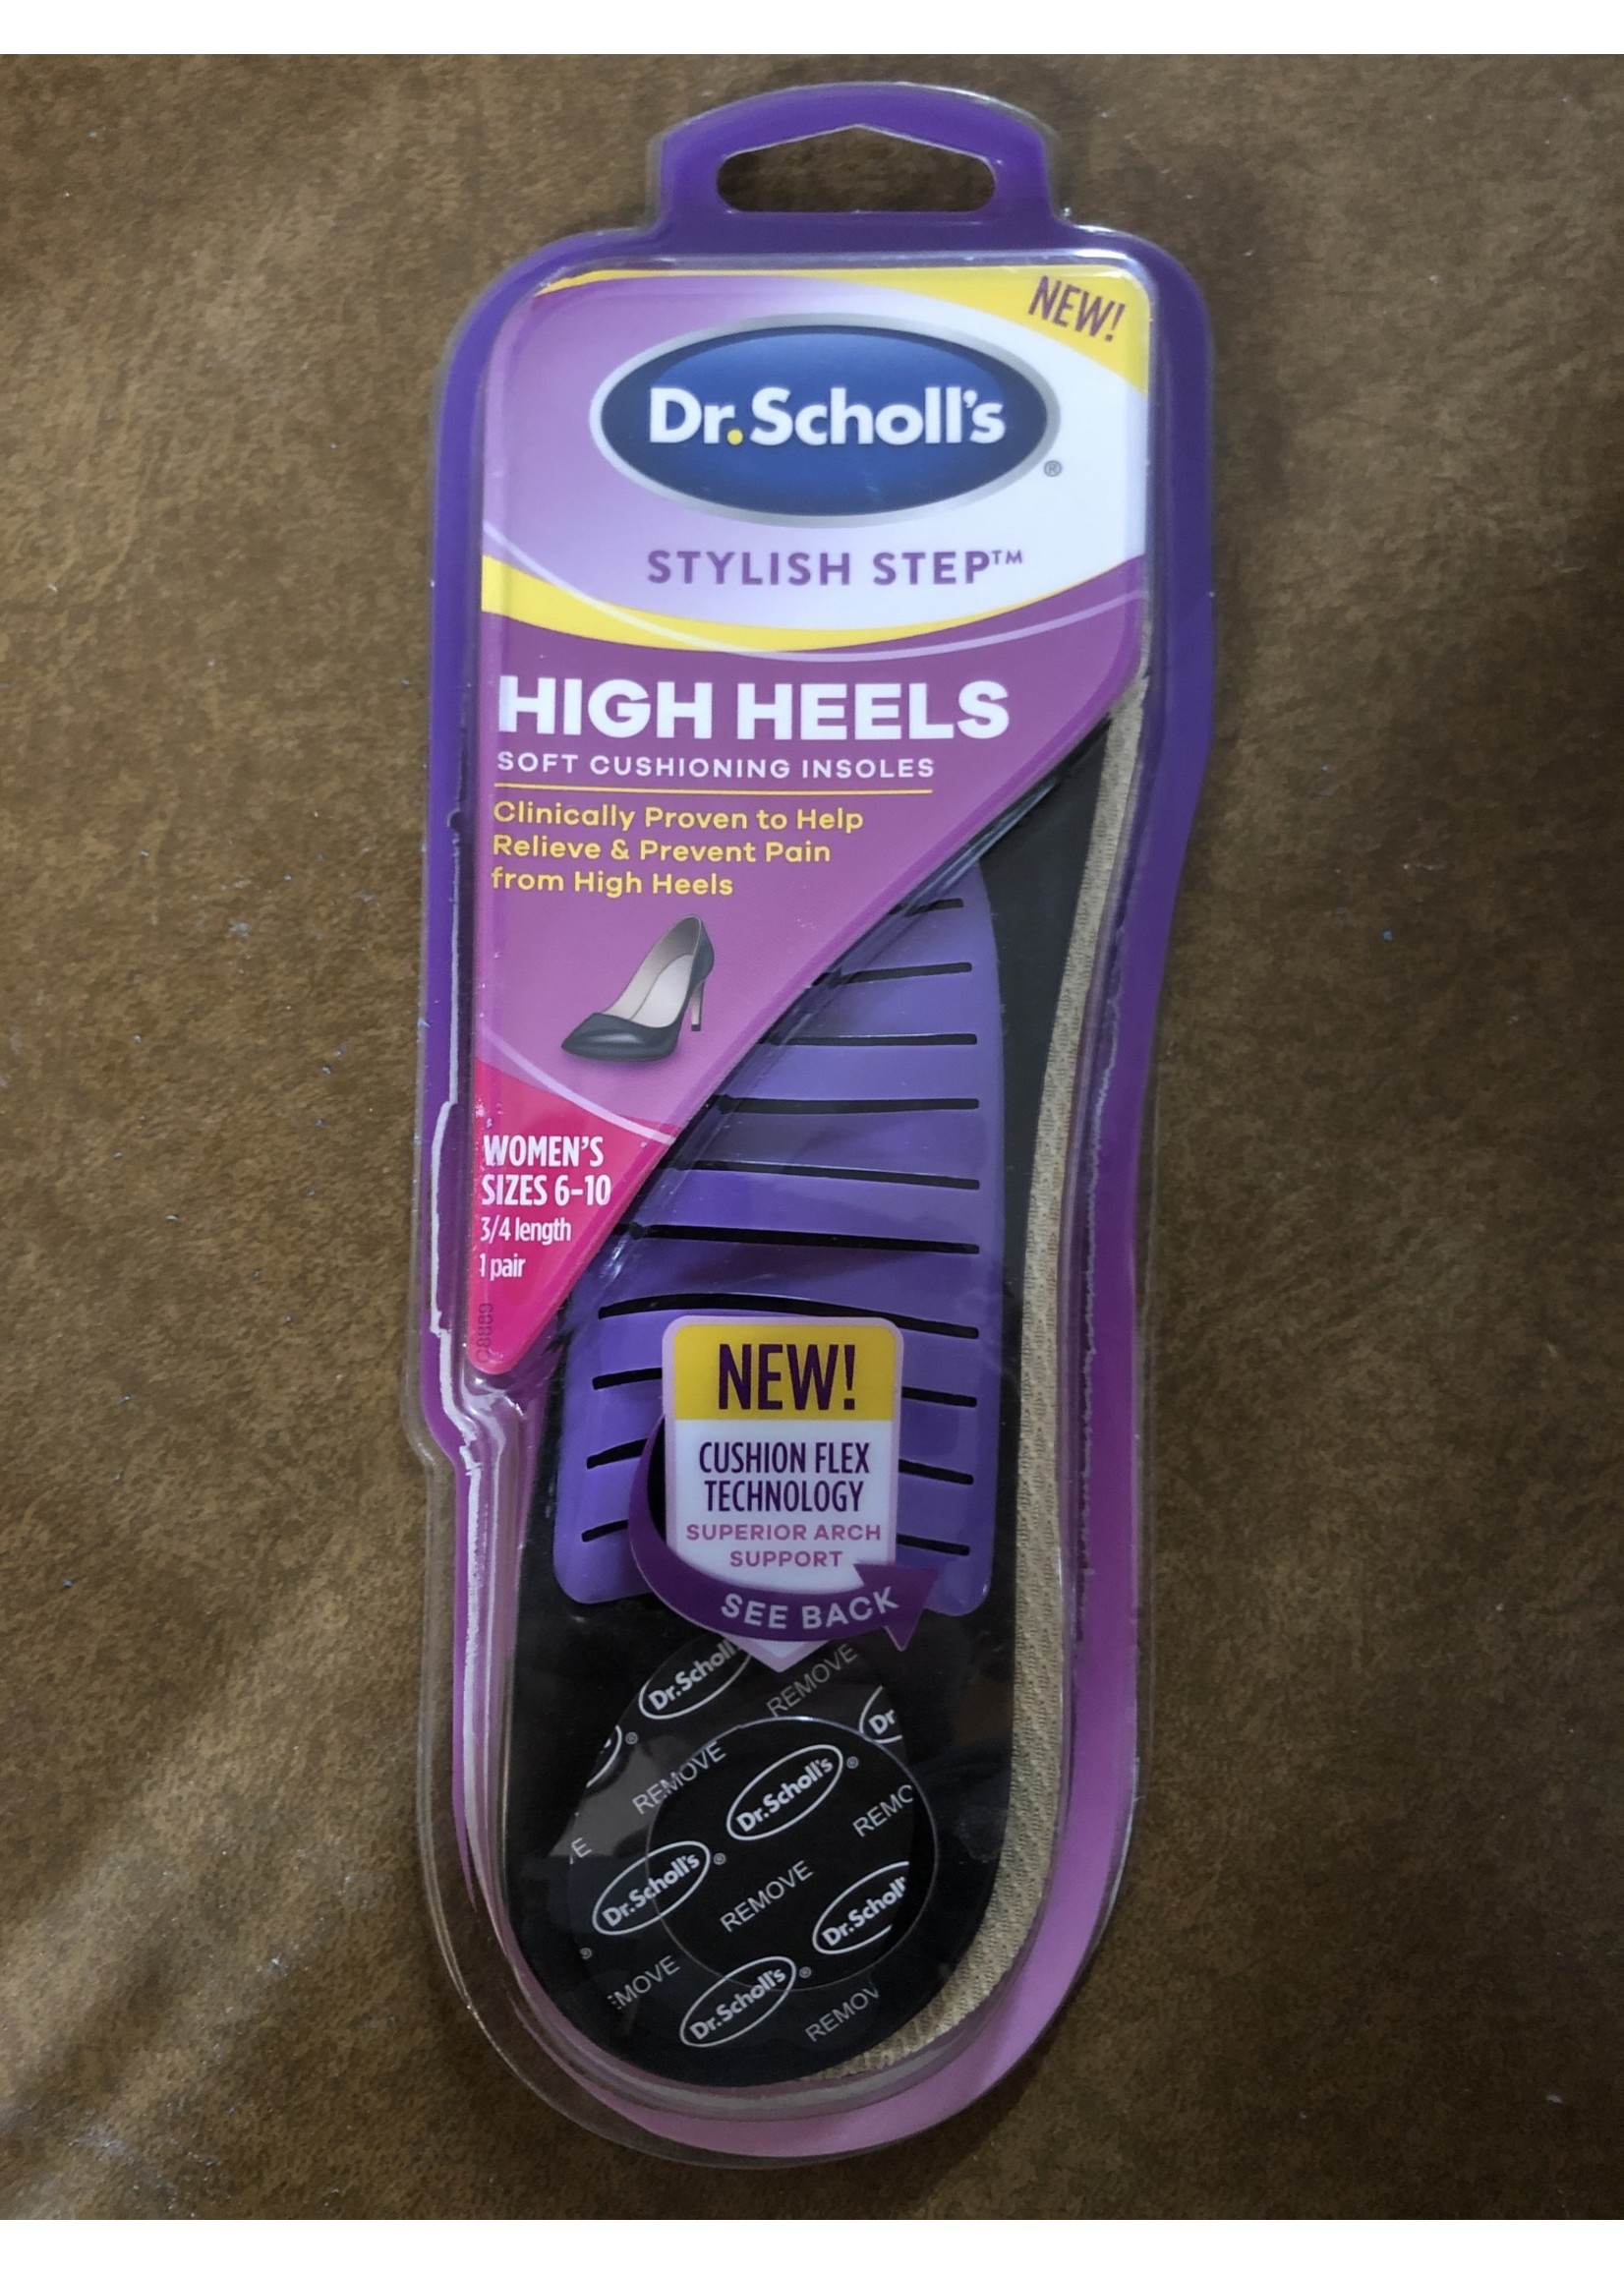 Open pack-Dr Scholl's Stylish Step Soft Cushioning Insoles for High Heels - 1 Pair - Size (6-10)